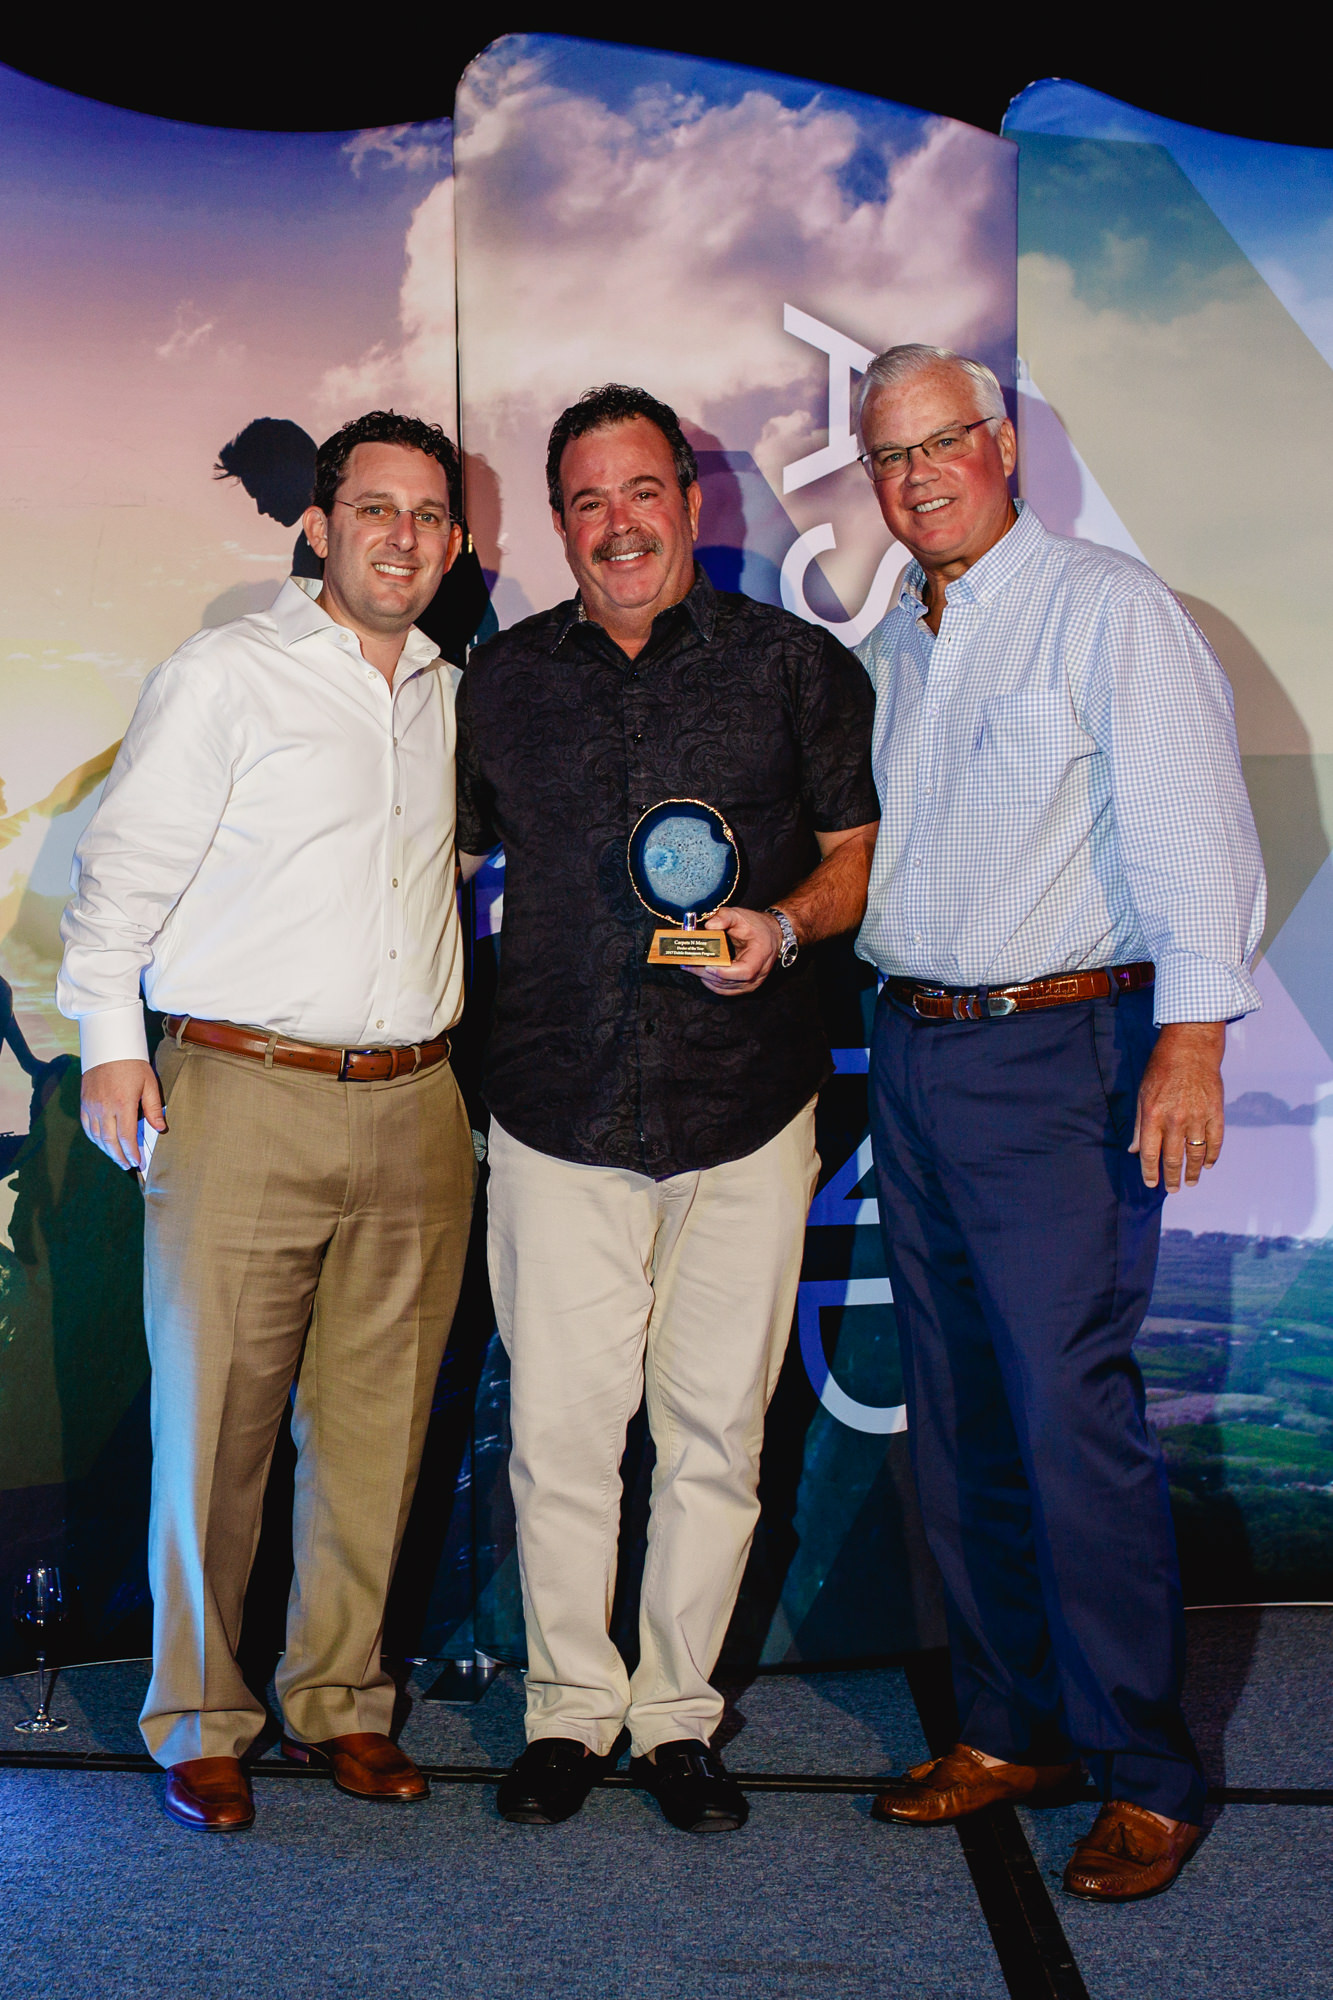 Steve Chesin of Carpets N More named Statements Dealer of the Year (c.) with Daltile's Jeremy Sax (l) and John Cousins.